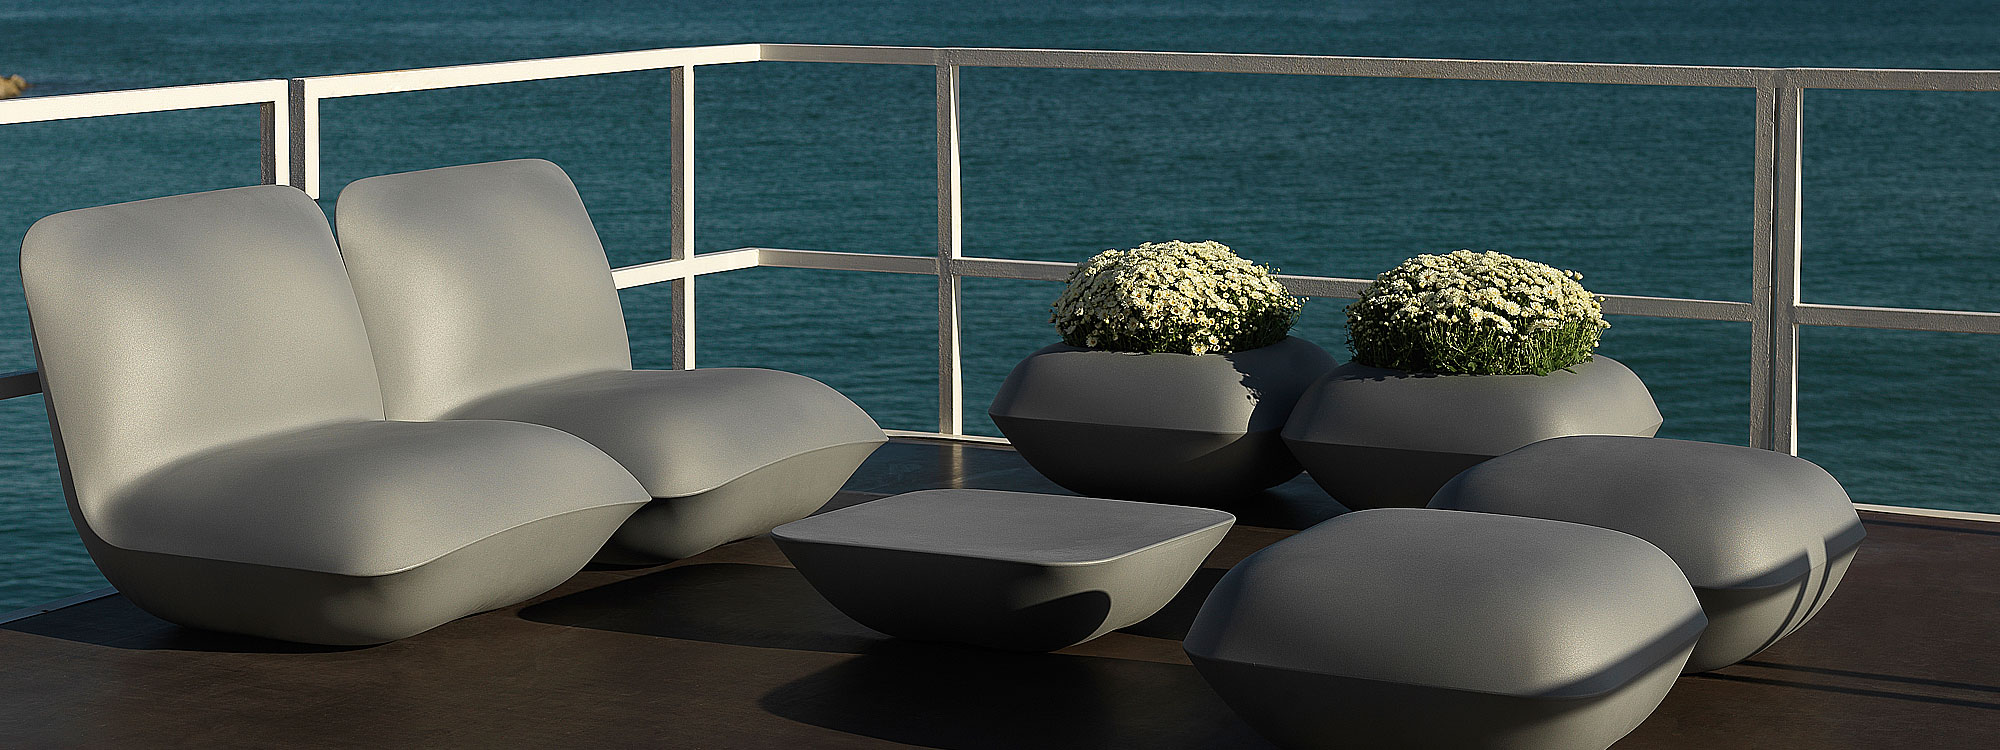 Image of steel coloured Pillow lounge furniture by Vondom on waterside terrace